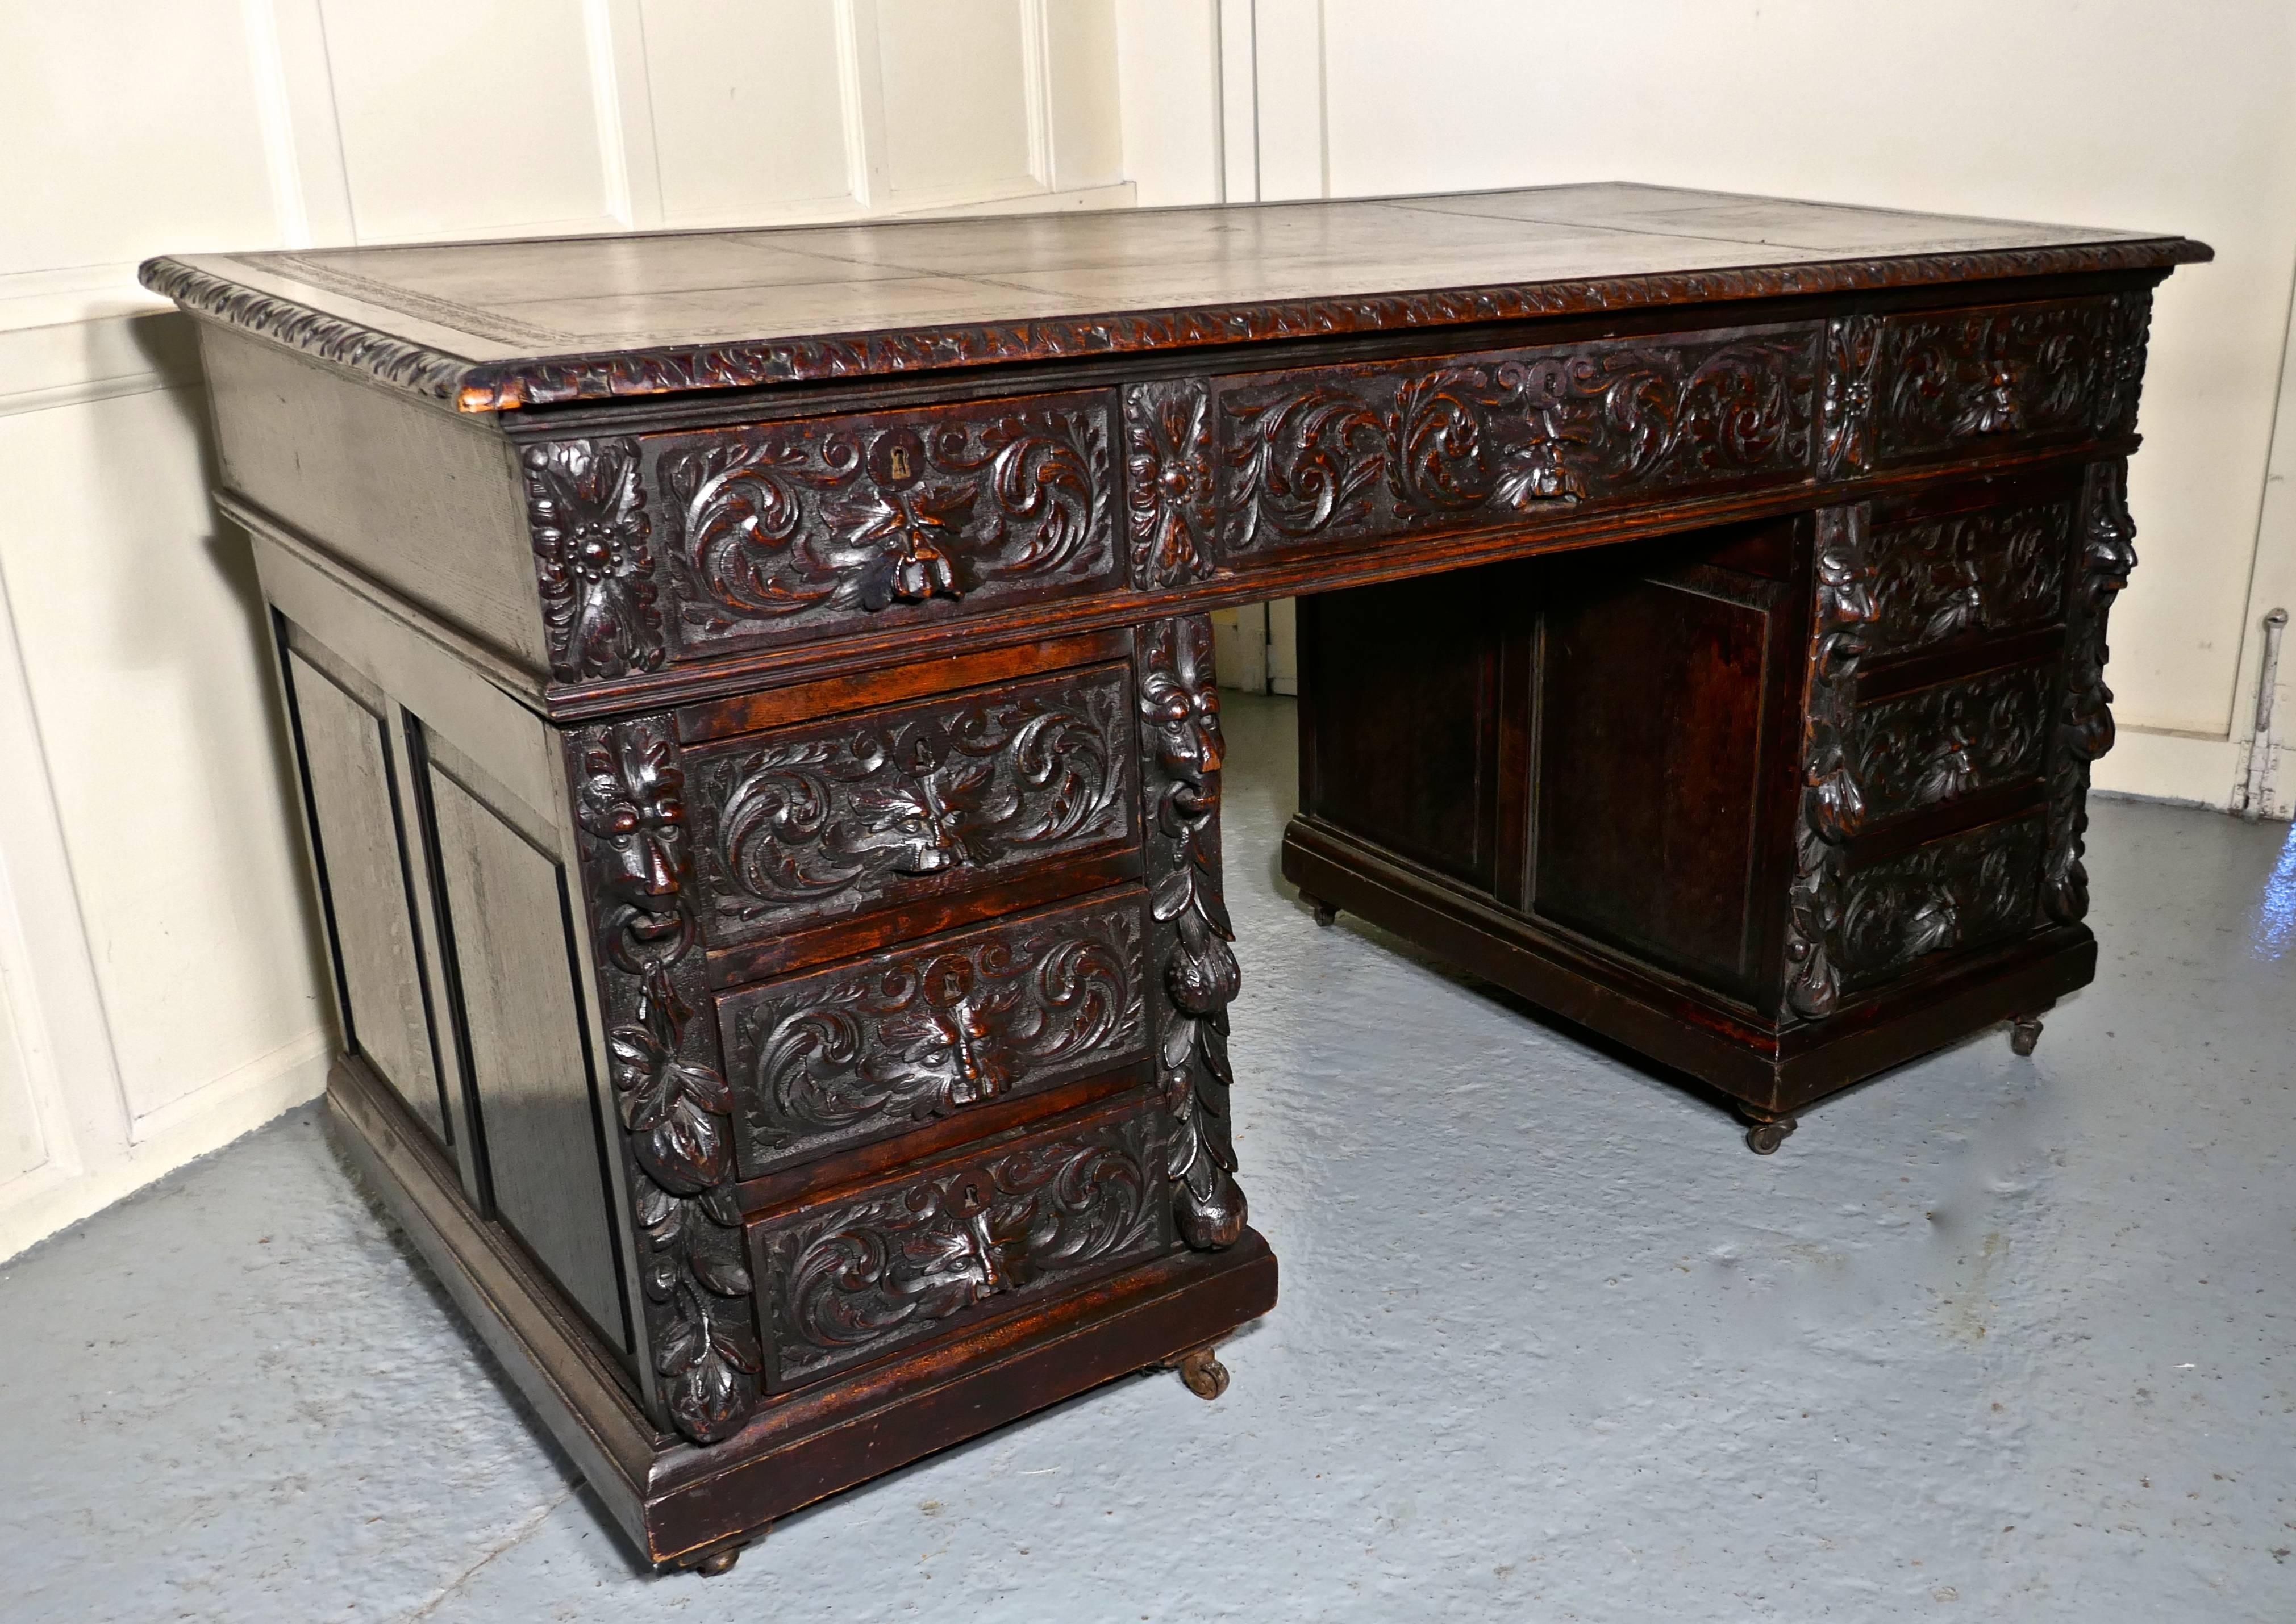 A superb large Victorian green man carved oak pedestal desk
 
This is a good large Victorian desk, made in oak which has been superbly and intricately carved with the masks of Lions or perhaps the green man. 
The top has its original inset light